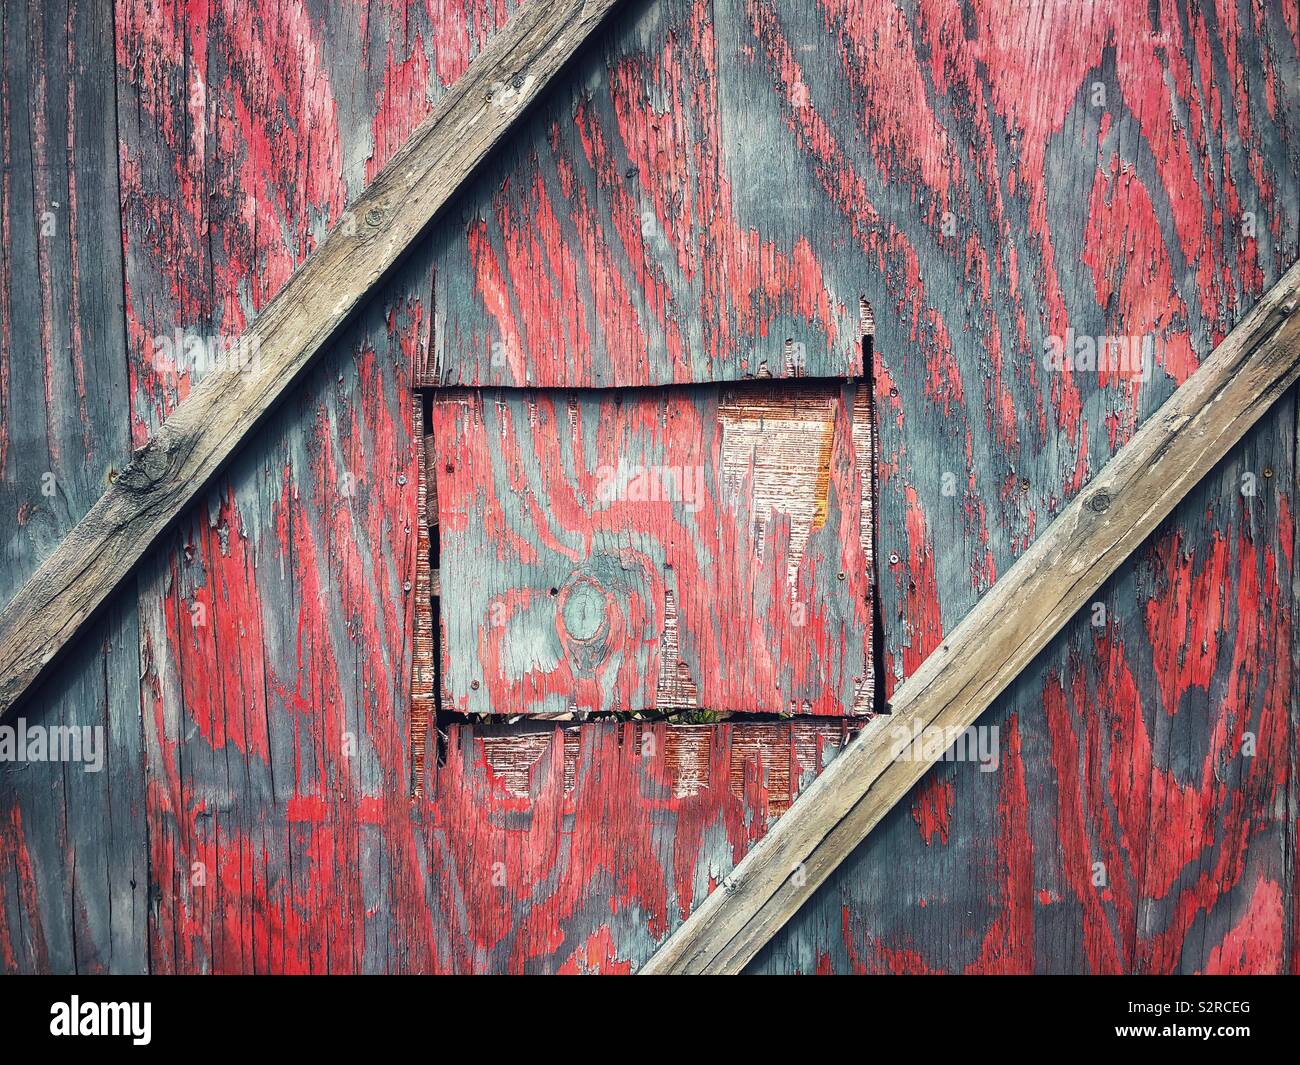 Square door in a faded red wooden hoarding. Stock Photo